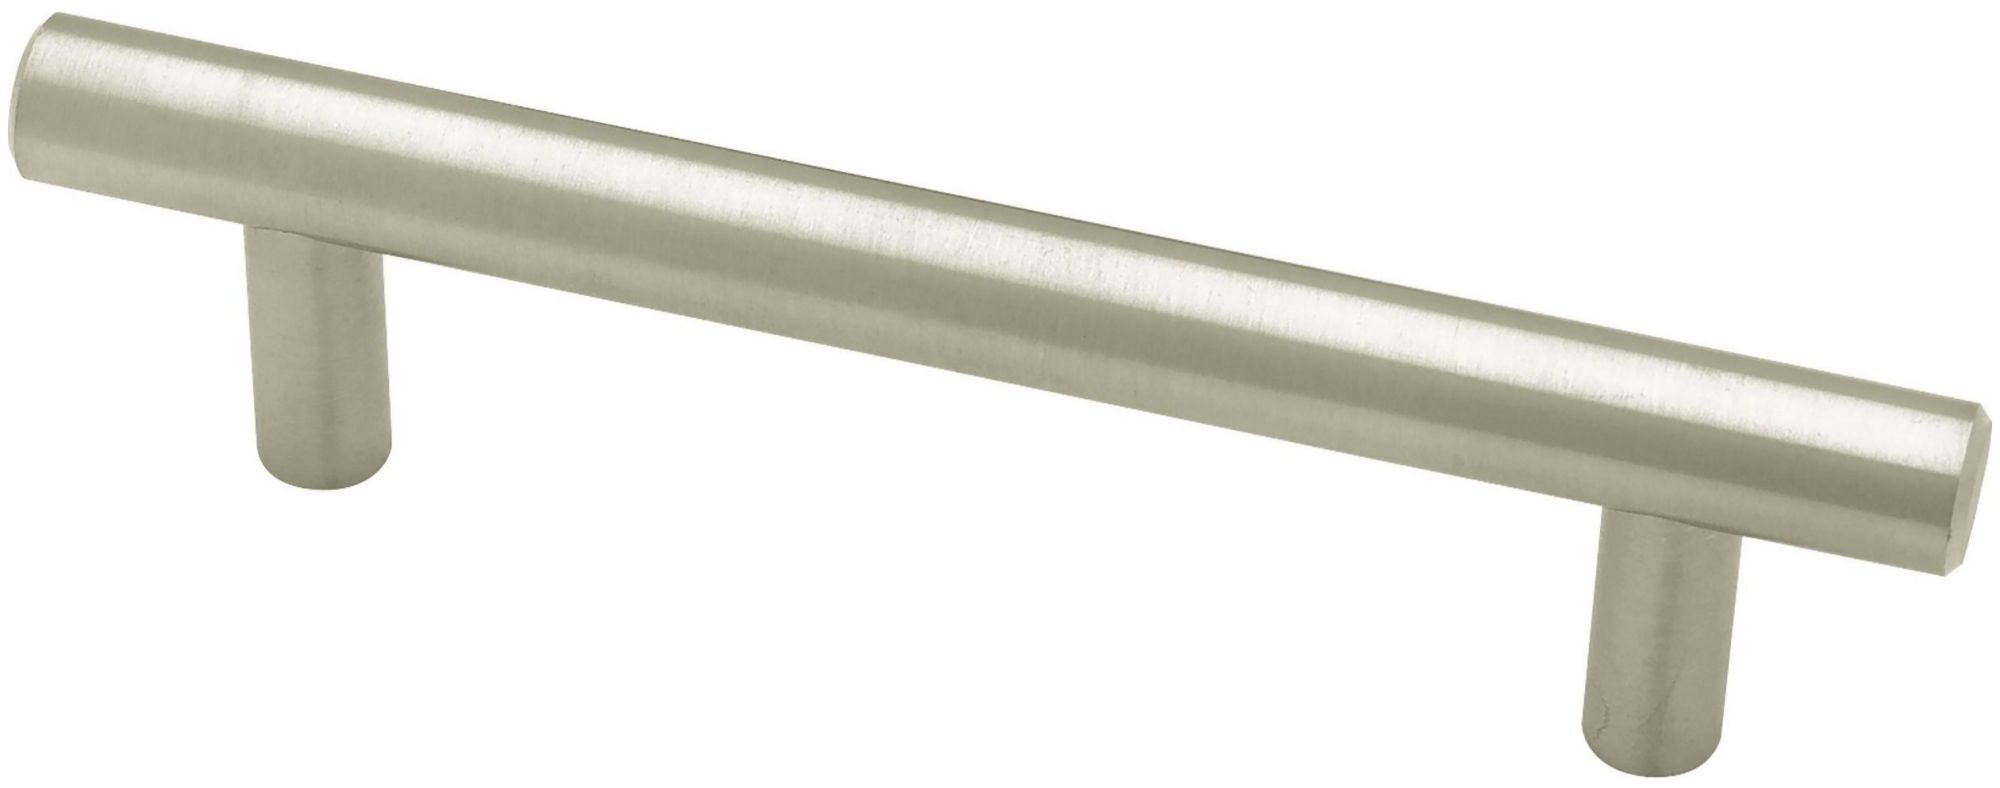 Franklin Brass 168300 3-3/4" Center To Center Bar Cabinet Pull - Stainless Steel - image 1 of 3